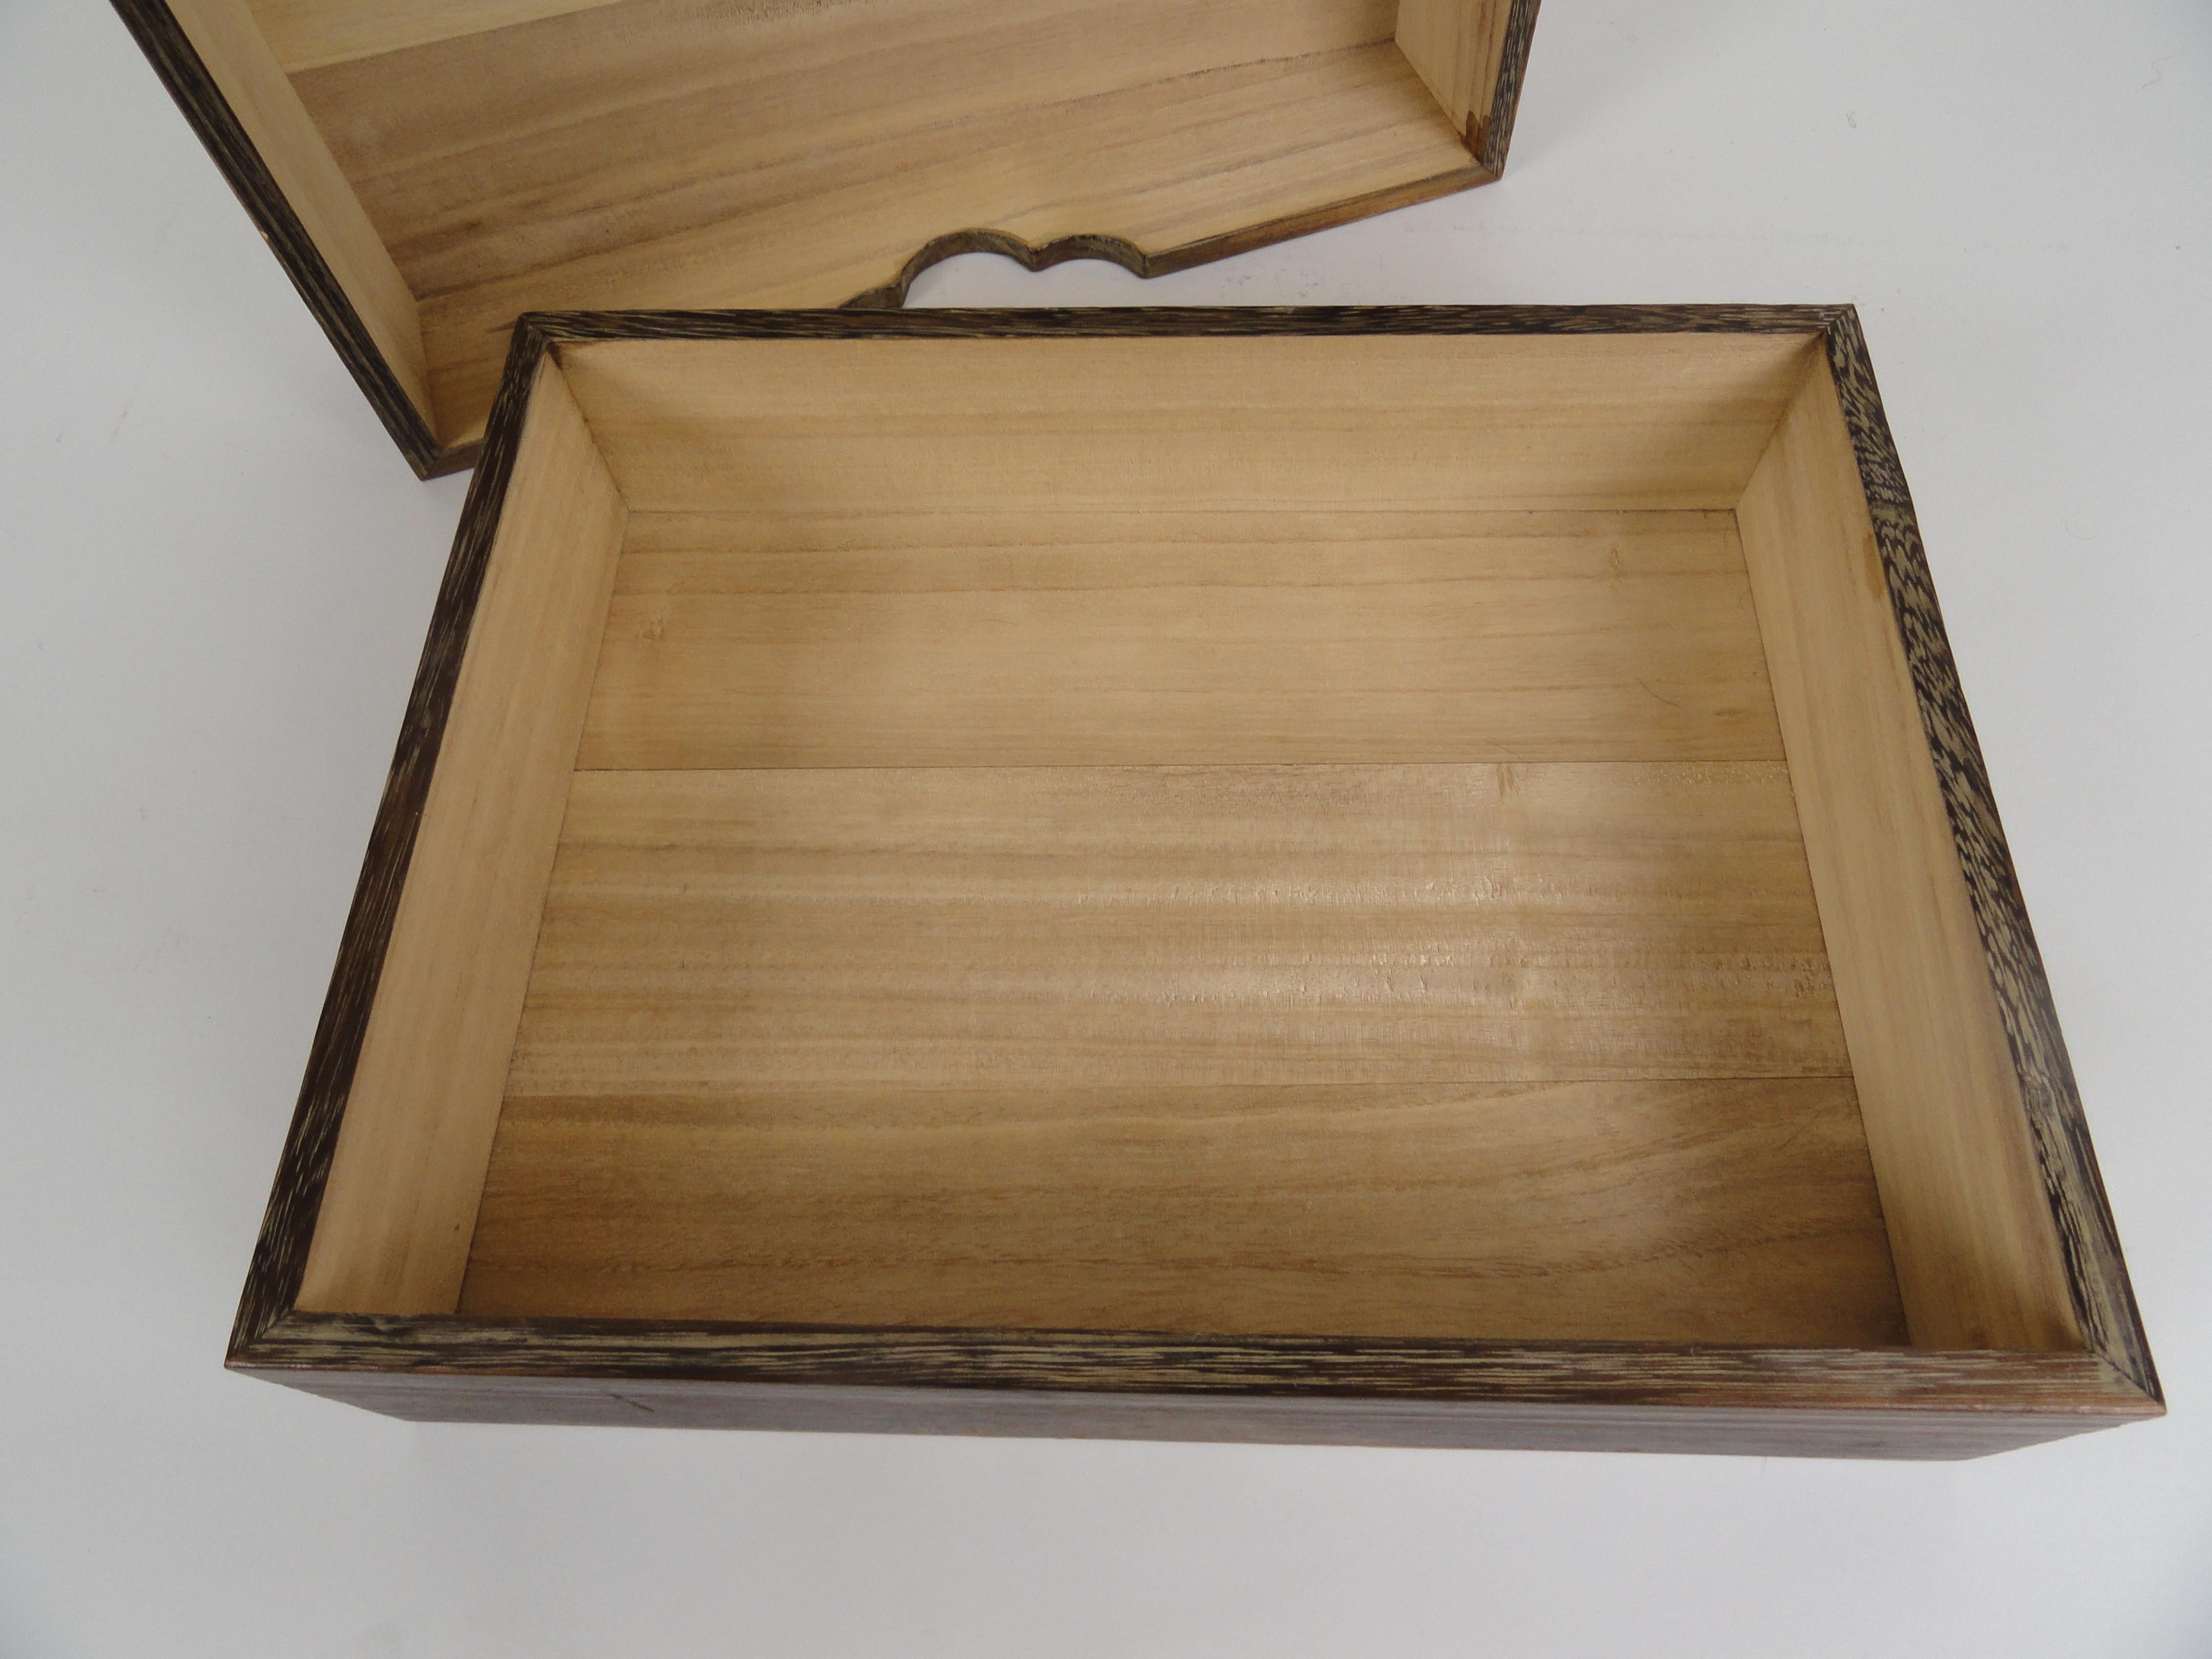 Japanese Wood Box In Excellent Condition For Sale In West Palm Beach, FL